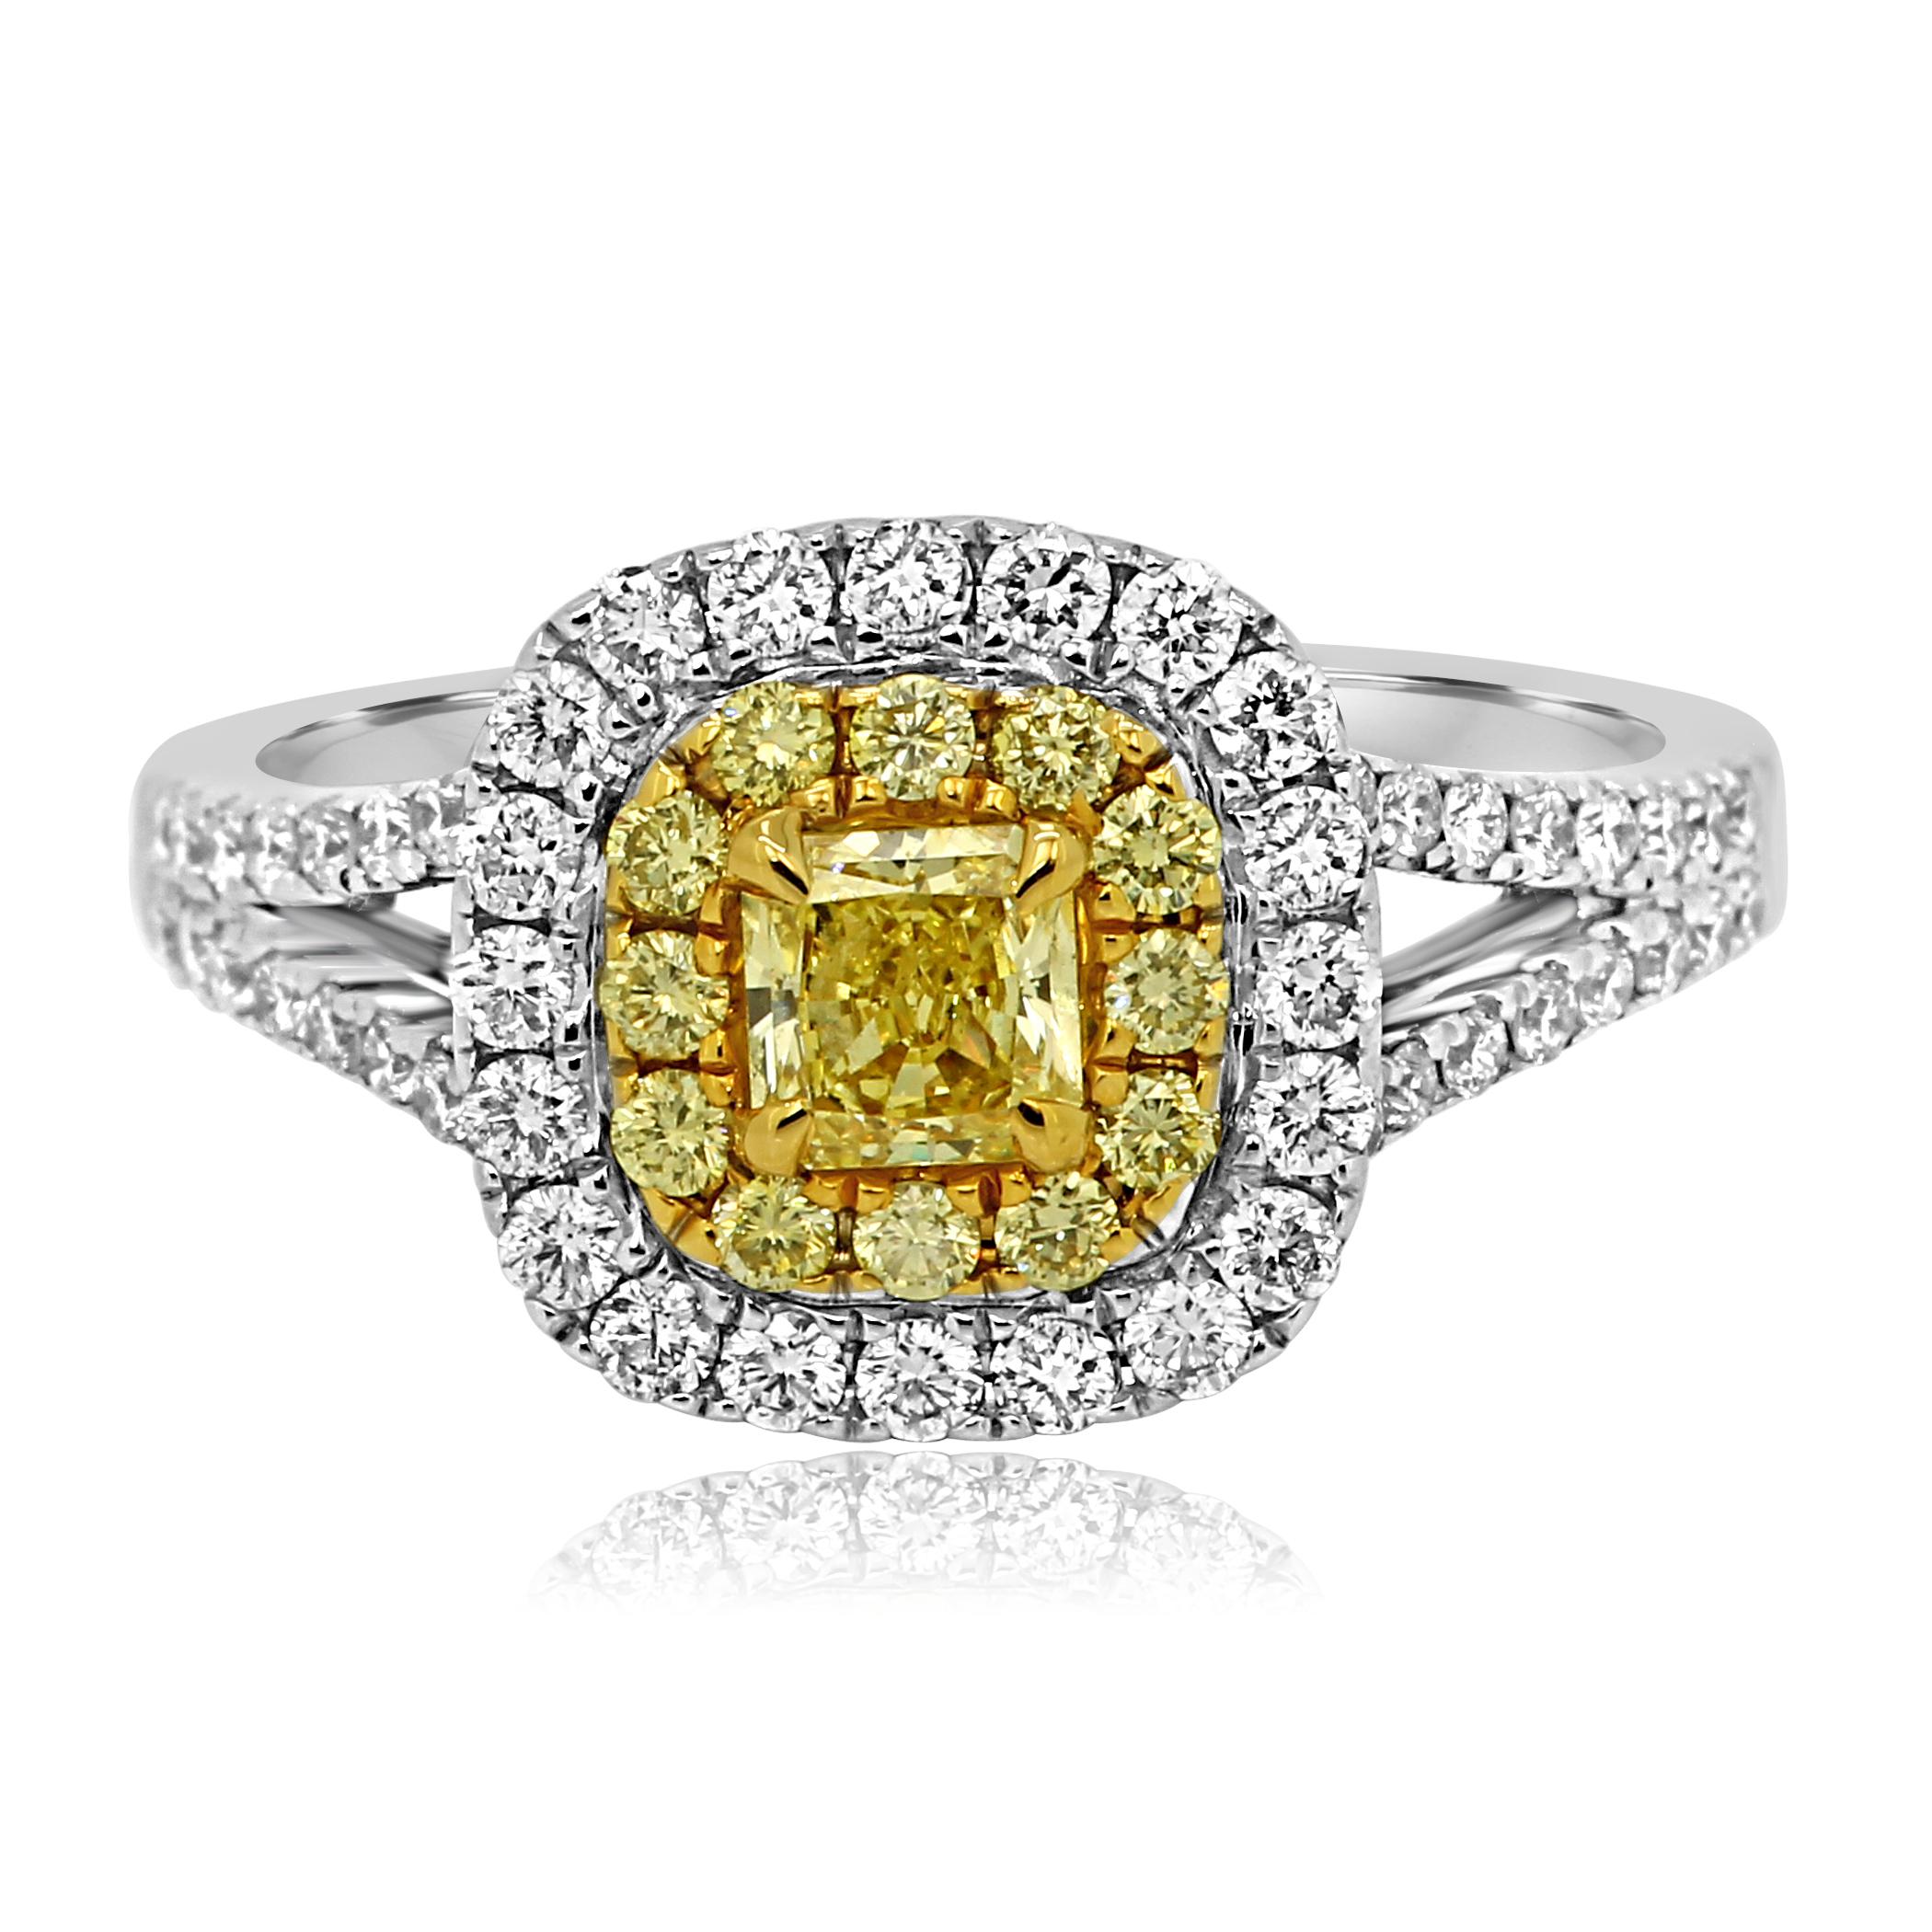  Natural Fancy Yellow Radiant VS1 0.74 Carat encircled in a Double Halo of Natural Fancy Yellow Round Diamonds 0.17 Carat and White Diamond Rounds 0.58 Carat in 18K White and Yellow Gold Ring.

Style available in different price ranges. Prices are